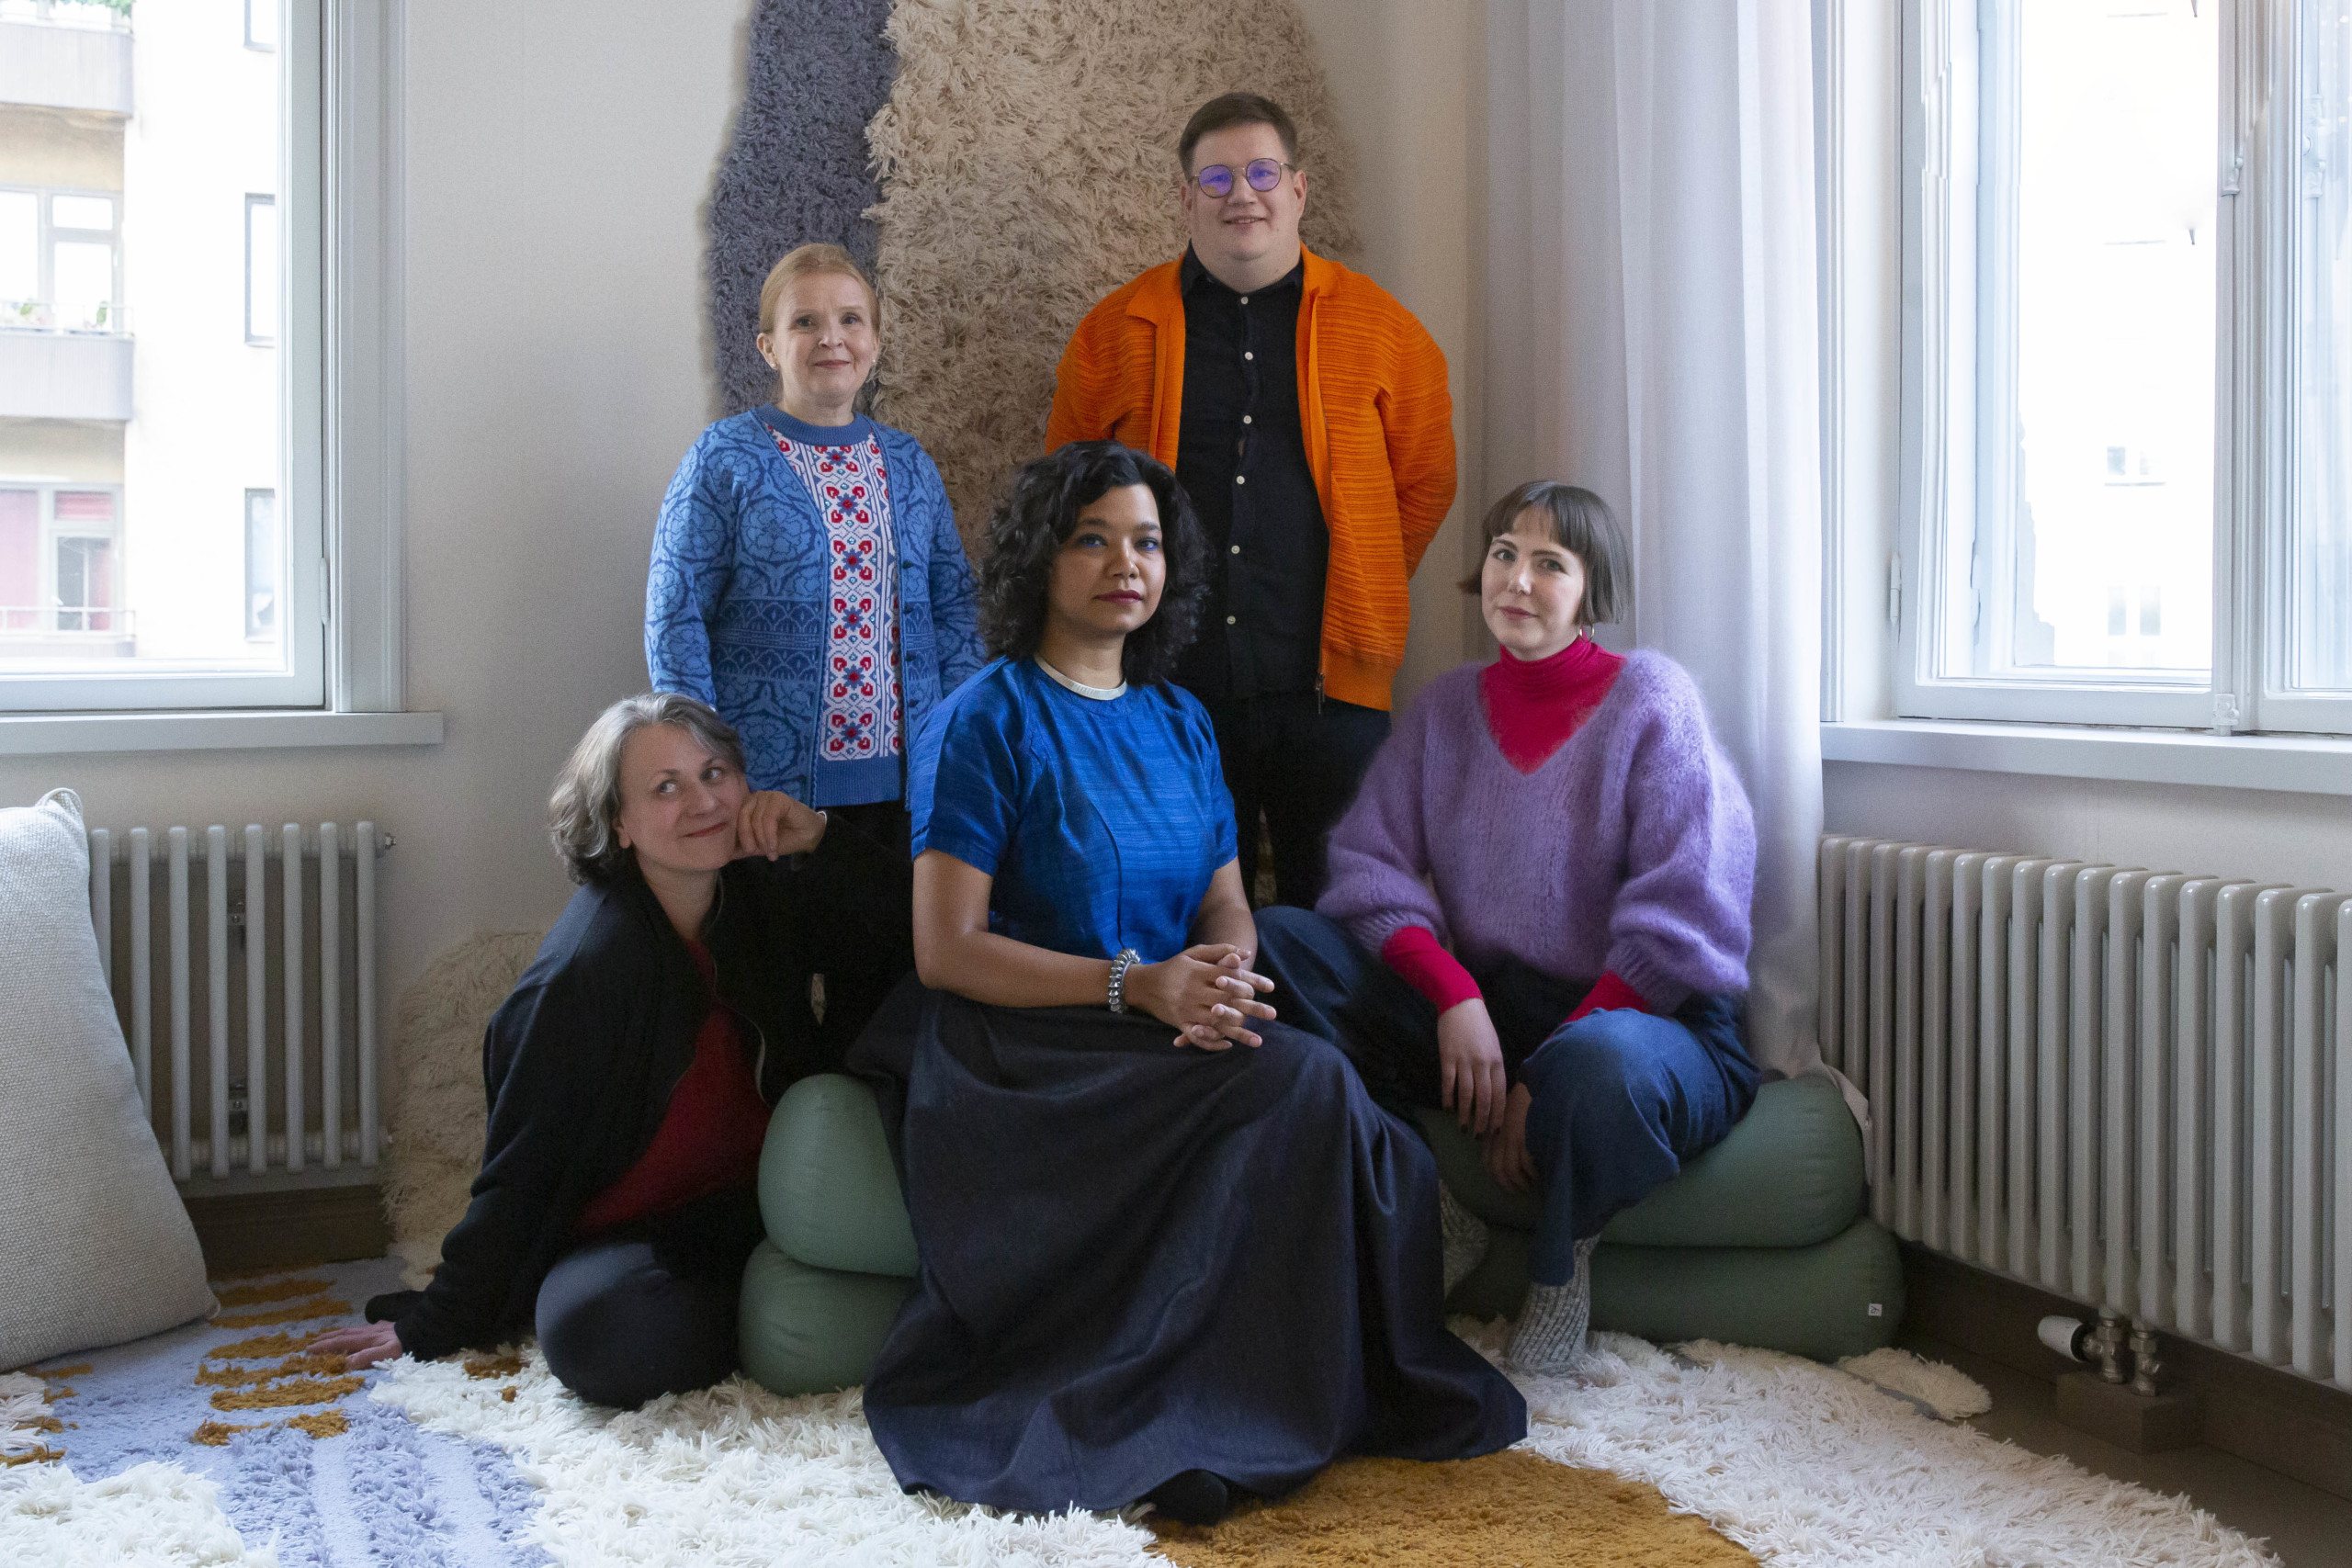 Three artists and two curators sitting next to each other and smiling at the camera. Starting from left is artist Pia Lindman, a white-skinned person with grey and brown hair, wearing a red shirt underneath a black cardigan. Next is artist Jenni-Juulia Wallinheimo-Heimonen, a white-skinned person with blonde hair, wearing a blue, white and red patterned knitted shirt and a blue cardigan on top. Next is artist Vidha Saumya, a person with light brown skin and wavy, dark brown hair and a bright blue shirt. Next to her are two curators, Jussi Koitela and . Jussi is a white-skinned with blonde hair, wearing a bright orange jacket and Yvnonne is a white-skinned person with ash-blond hair, wearing a bright lavender sweater over a pink shirt.